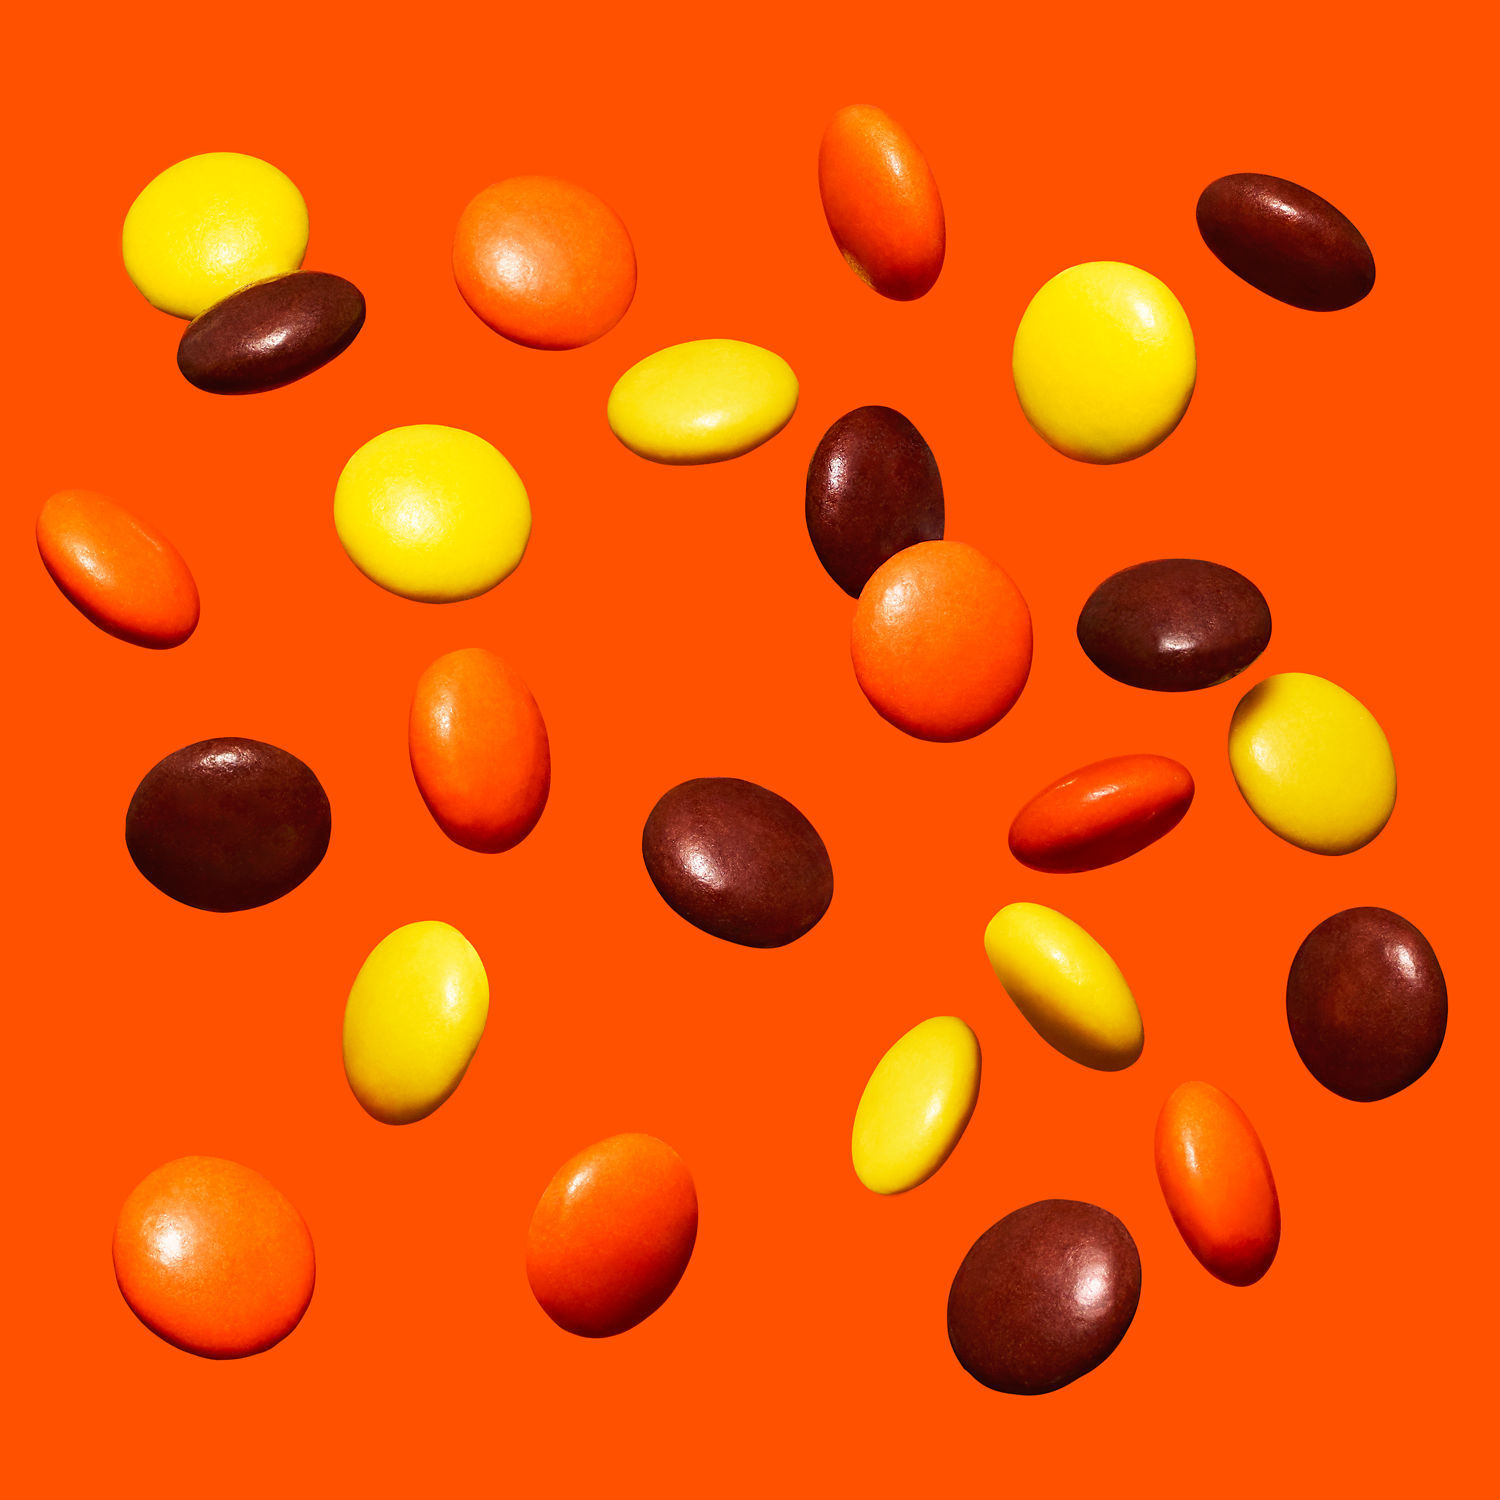 Reese's Pieces Peanut Butter Candy, Family Pack 18 oz - image 3 of 8